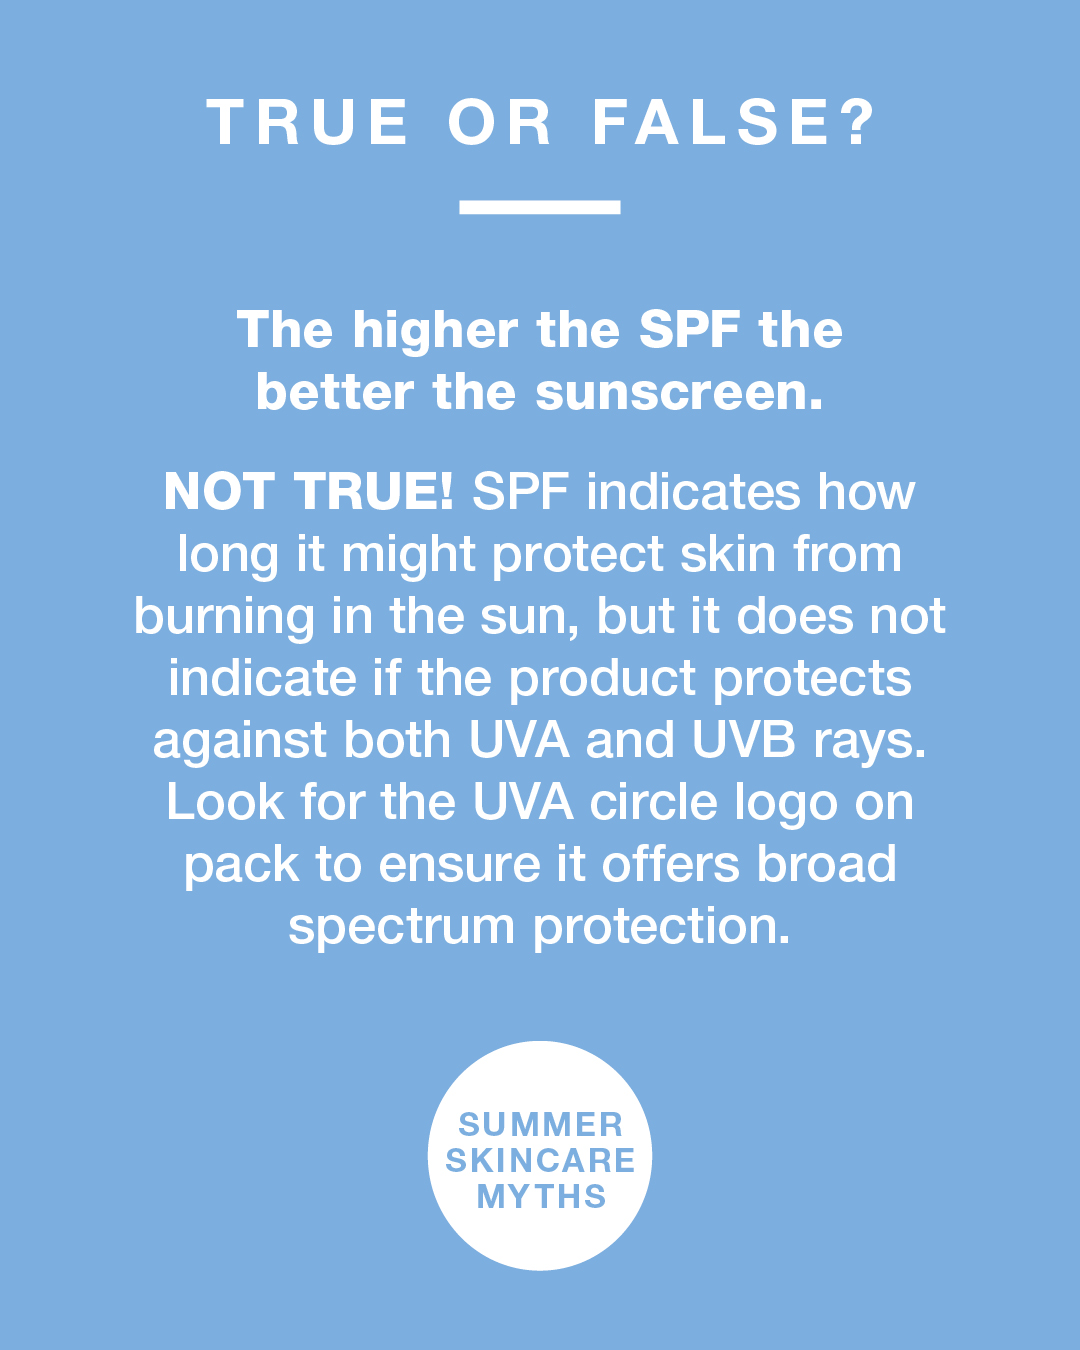 Summer skincare facts true or false. The higher the SPF the better the sunscreen. Not True.